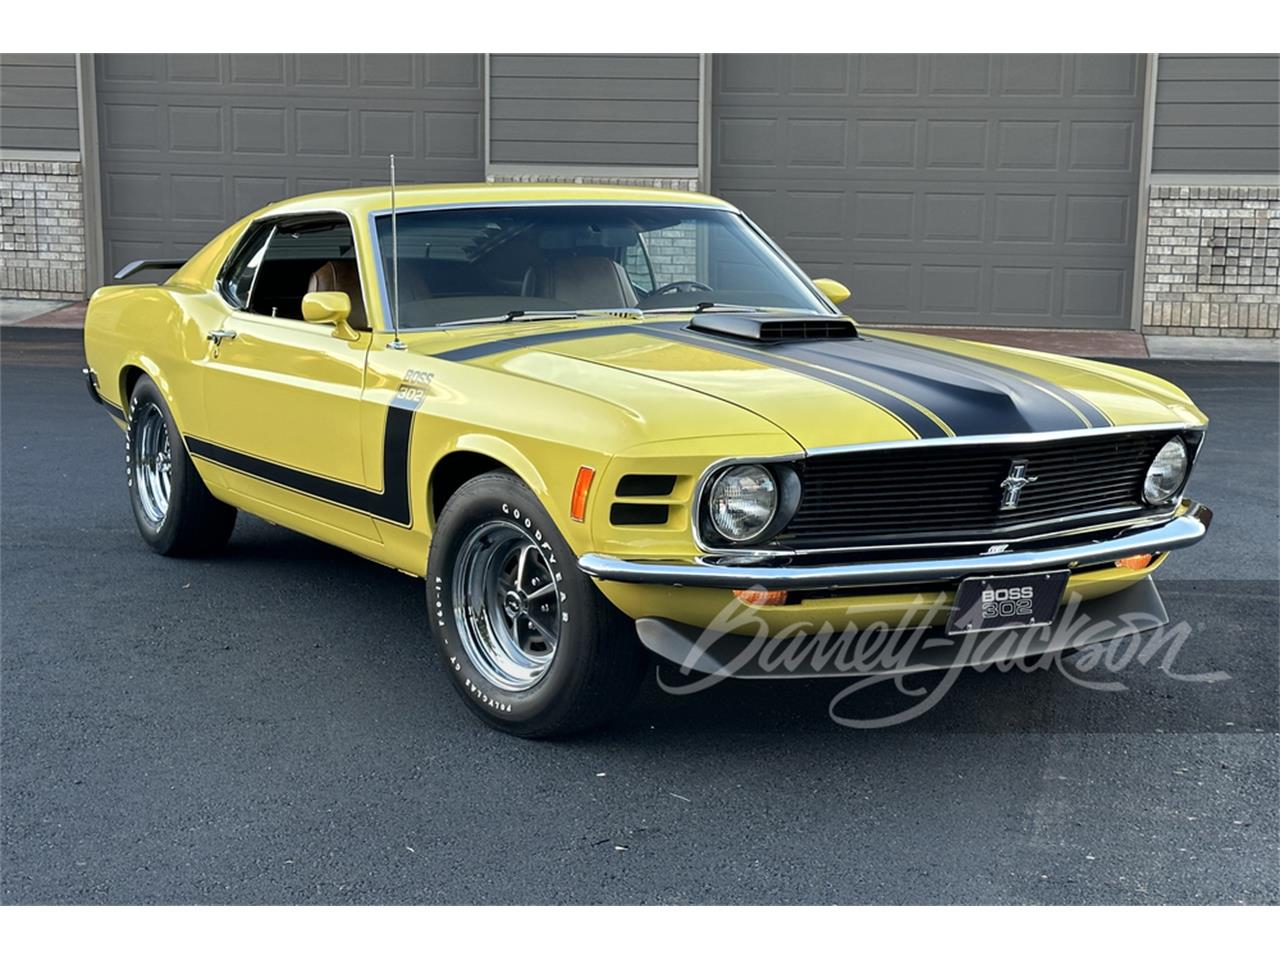 For Sale at Auction: 1970 Ford Mustang Boss 302 in Scottsdale, Arizona for sale in Scottsdale, AZ